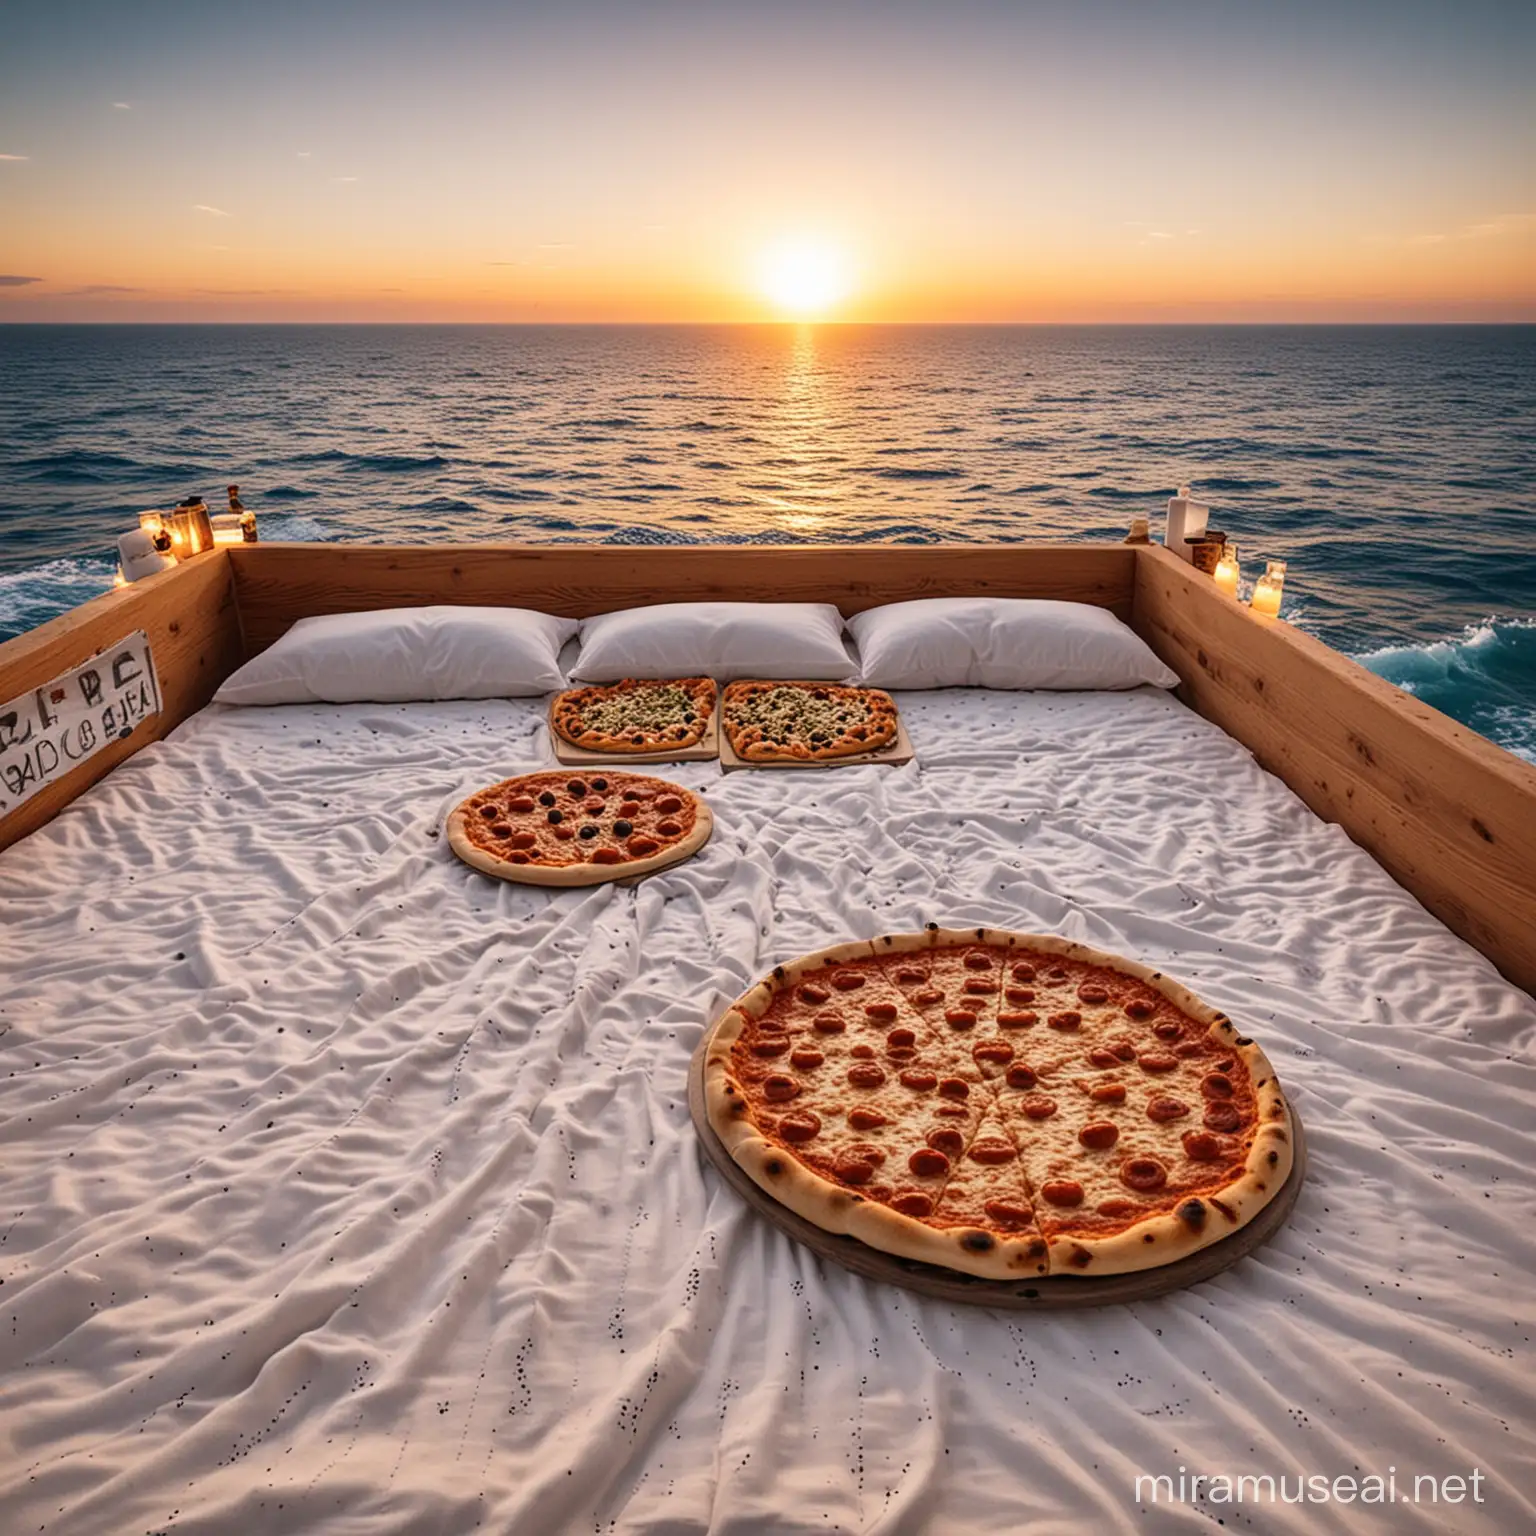 Delicious Italian Cuisine Served on a Floating Oasis